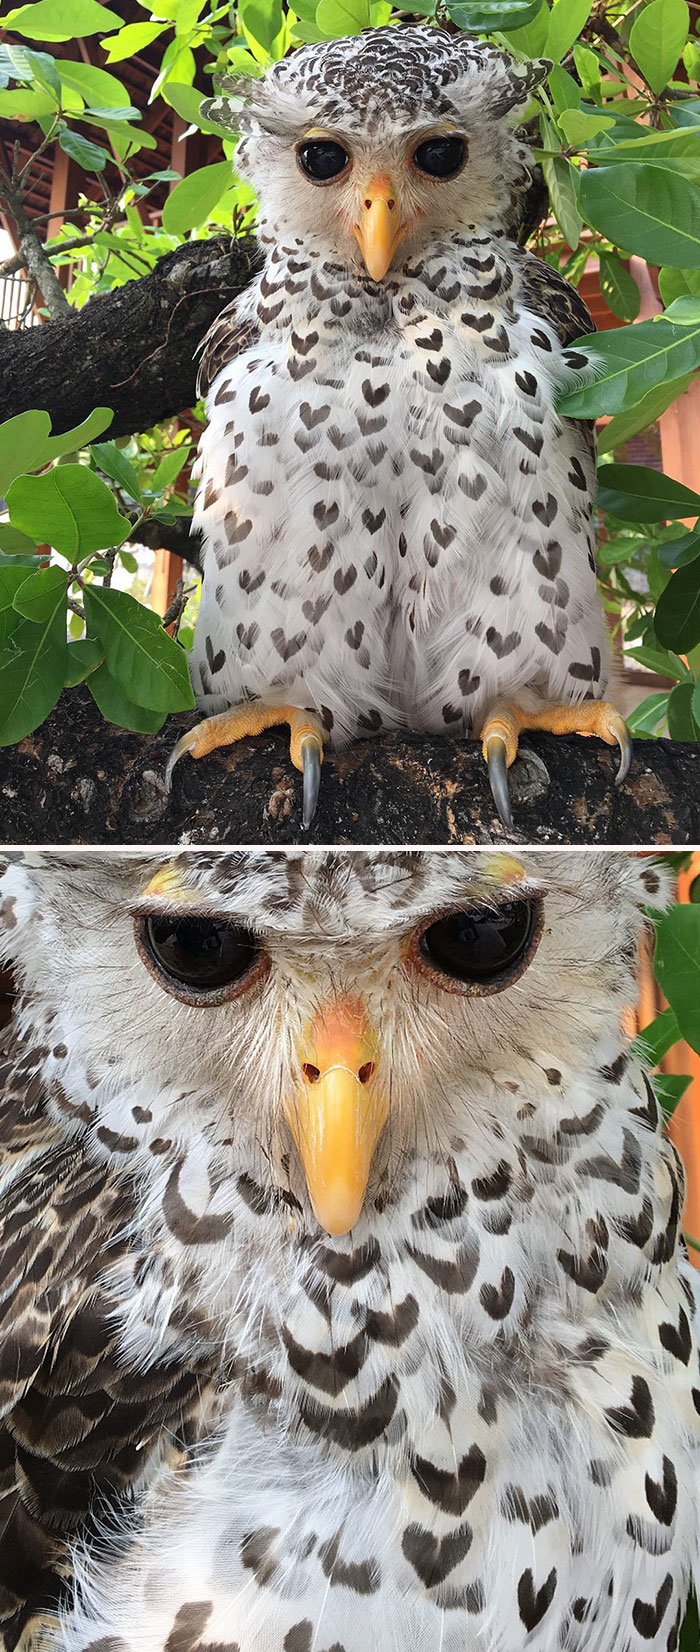 Spot-Bellied Eagle Owls Are Known To Possess Heart-Shaped Markings On Their Plumage